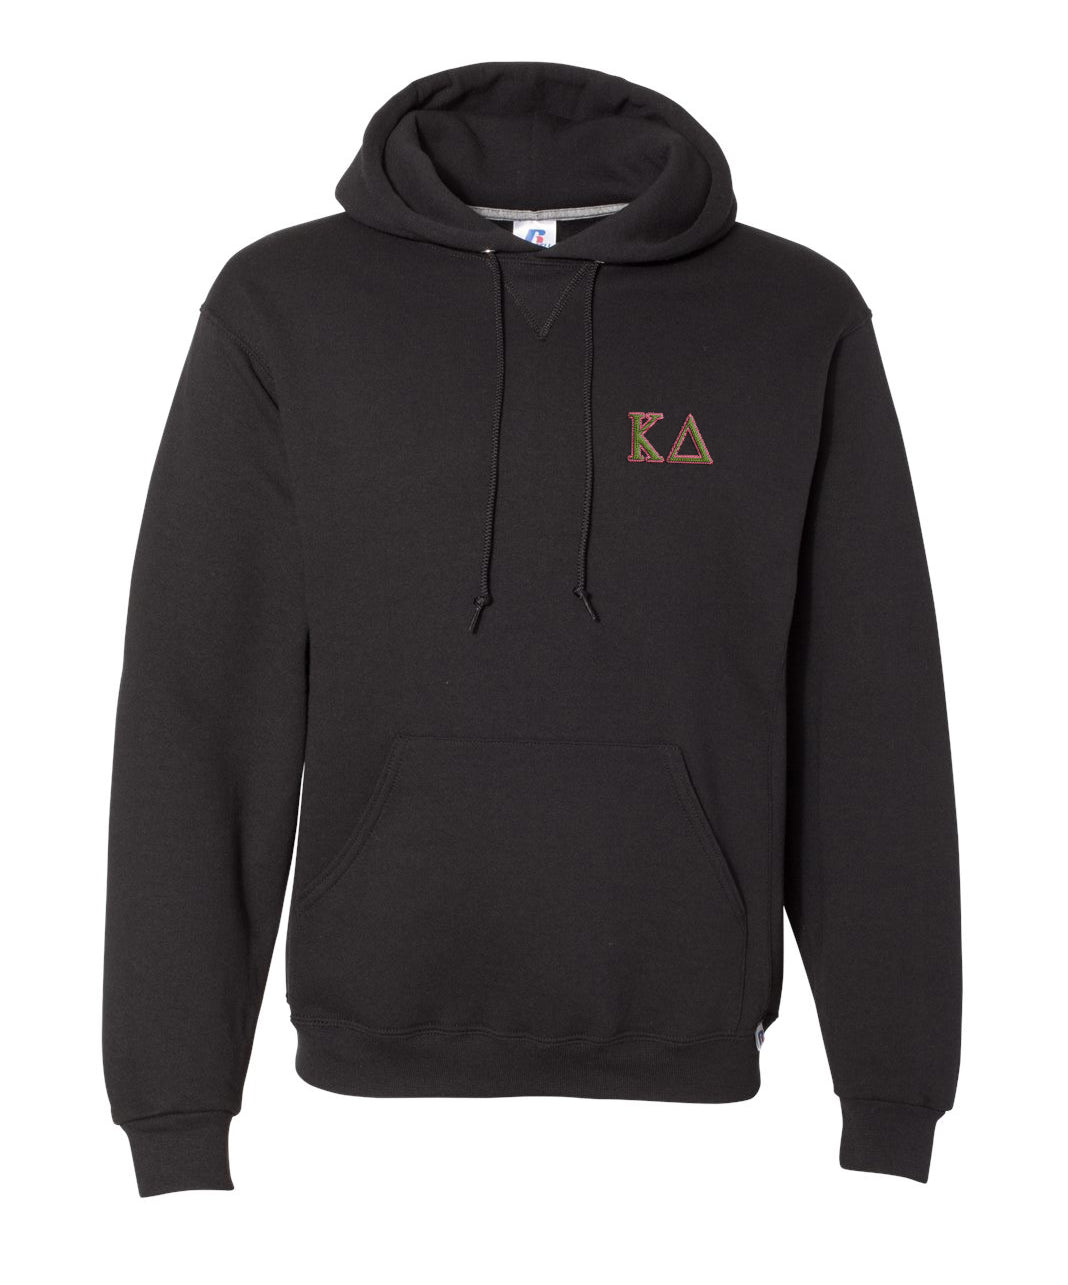 Kappa Delta Embroidered Hoodie